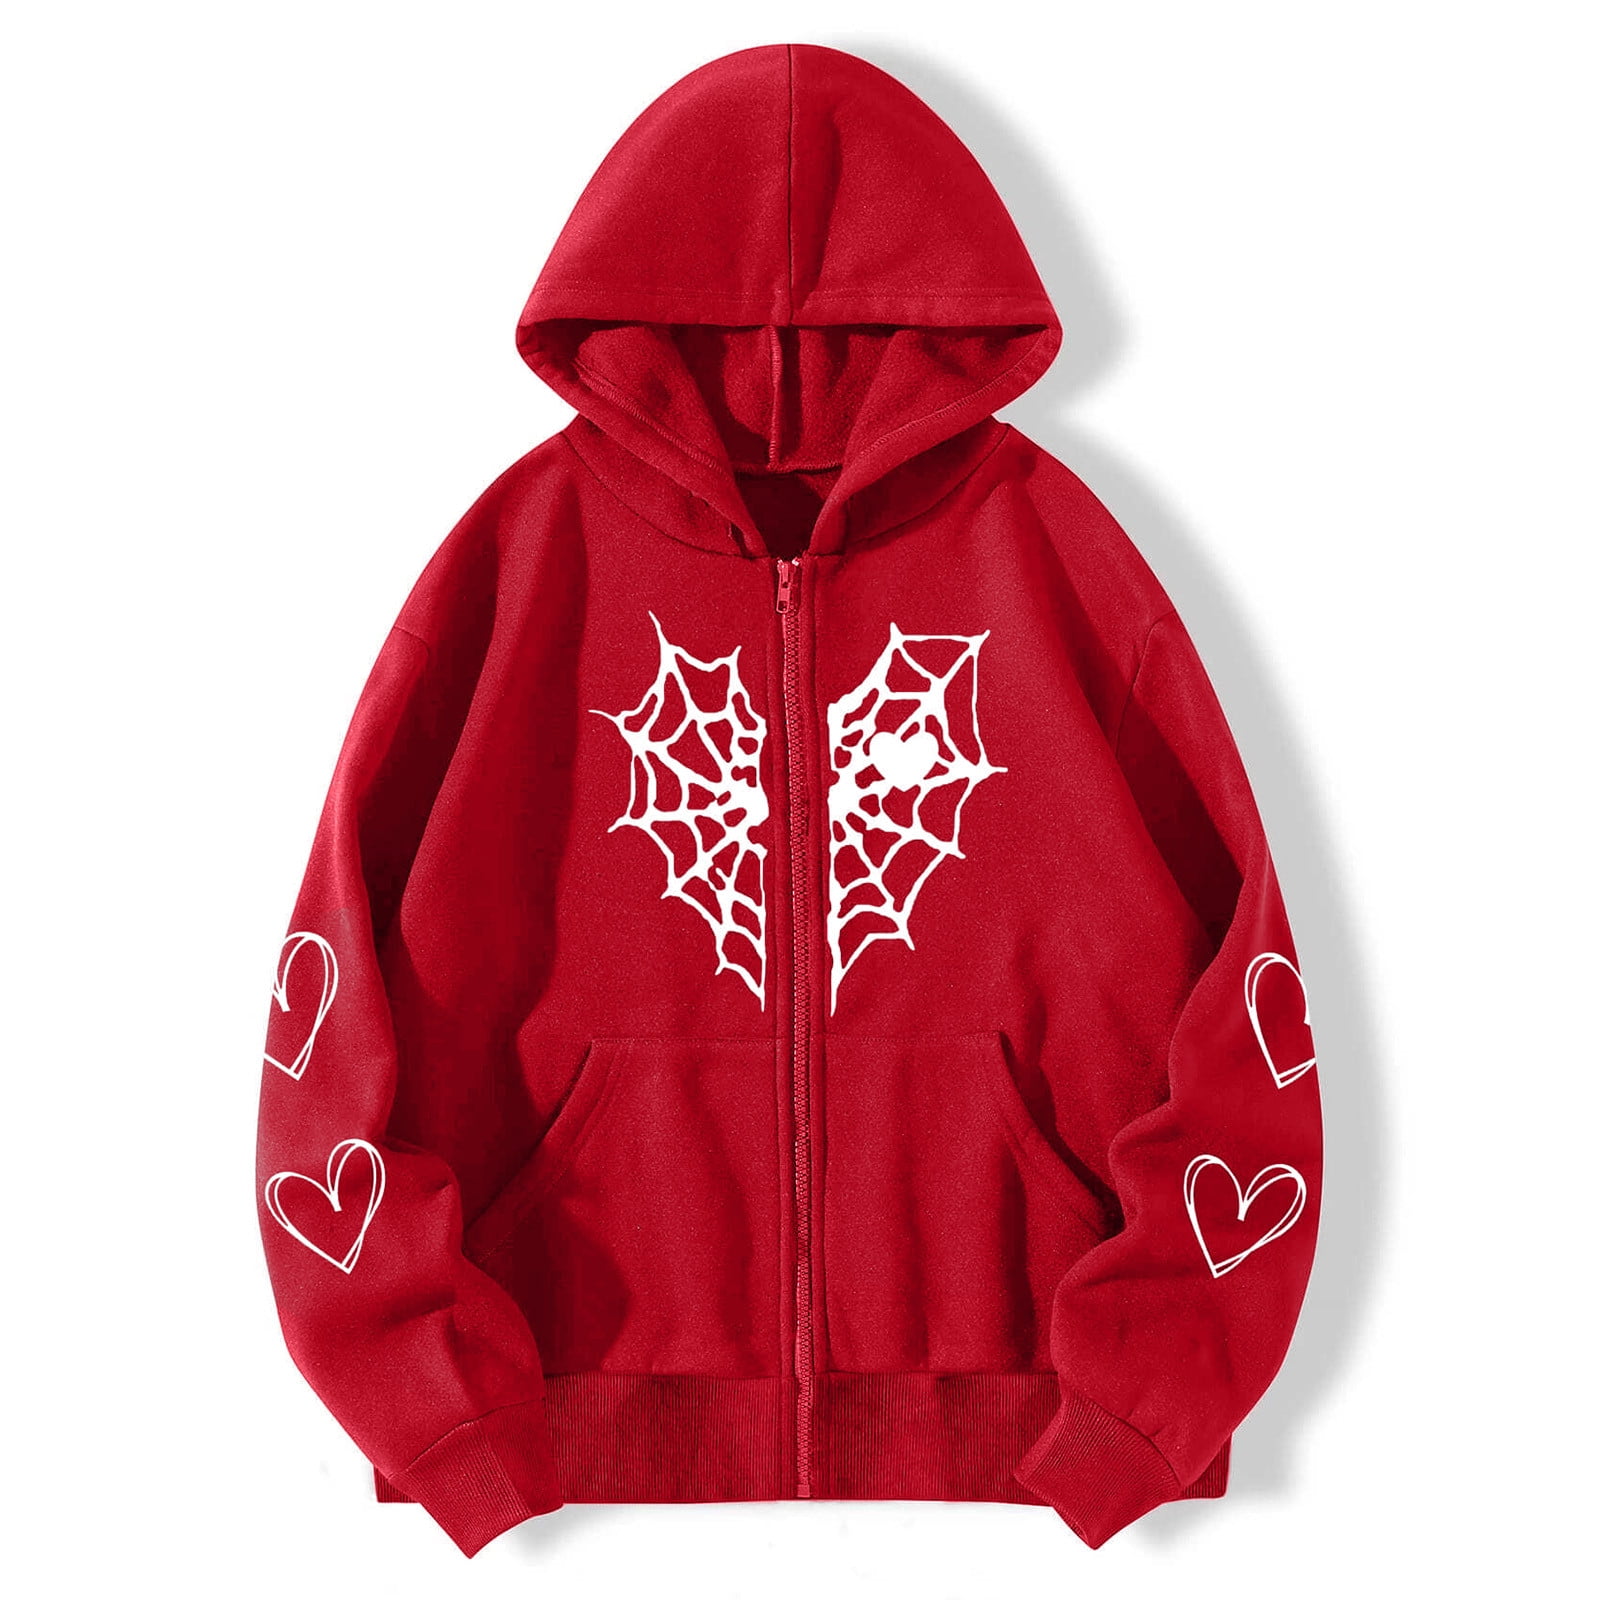 ZIZOCWA 100% Polyester Sweatshirt For Sublimation Woman Hooded Sweatshirt  Women Heart Print Gothic Style Long Sleeve Hoodlies Zipper Thermal Hoodie  With Pocket Coat Womens 1/4 Zip Pullover 